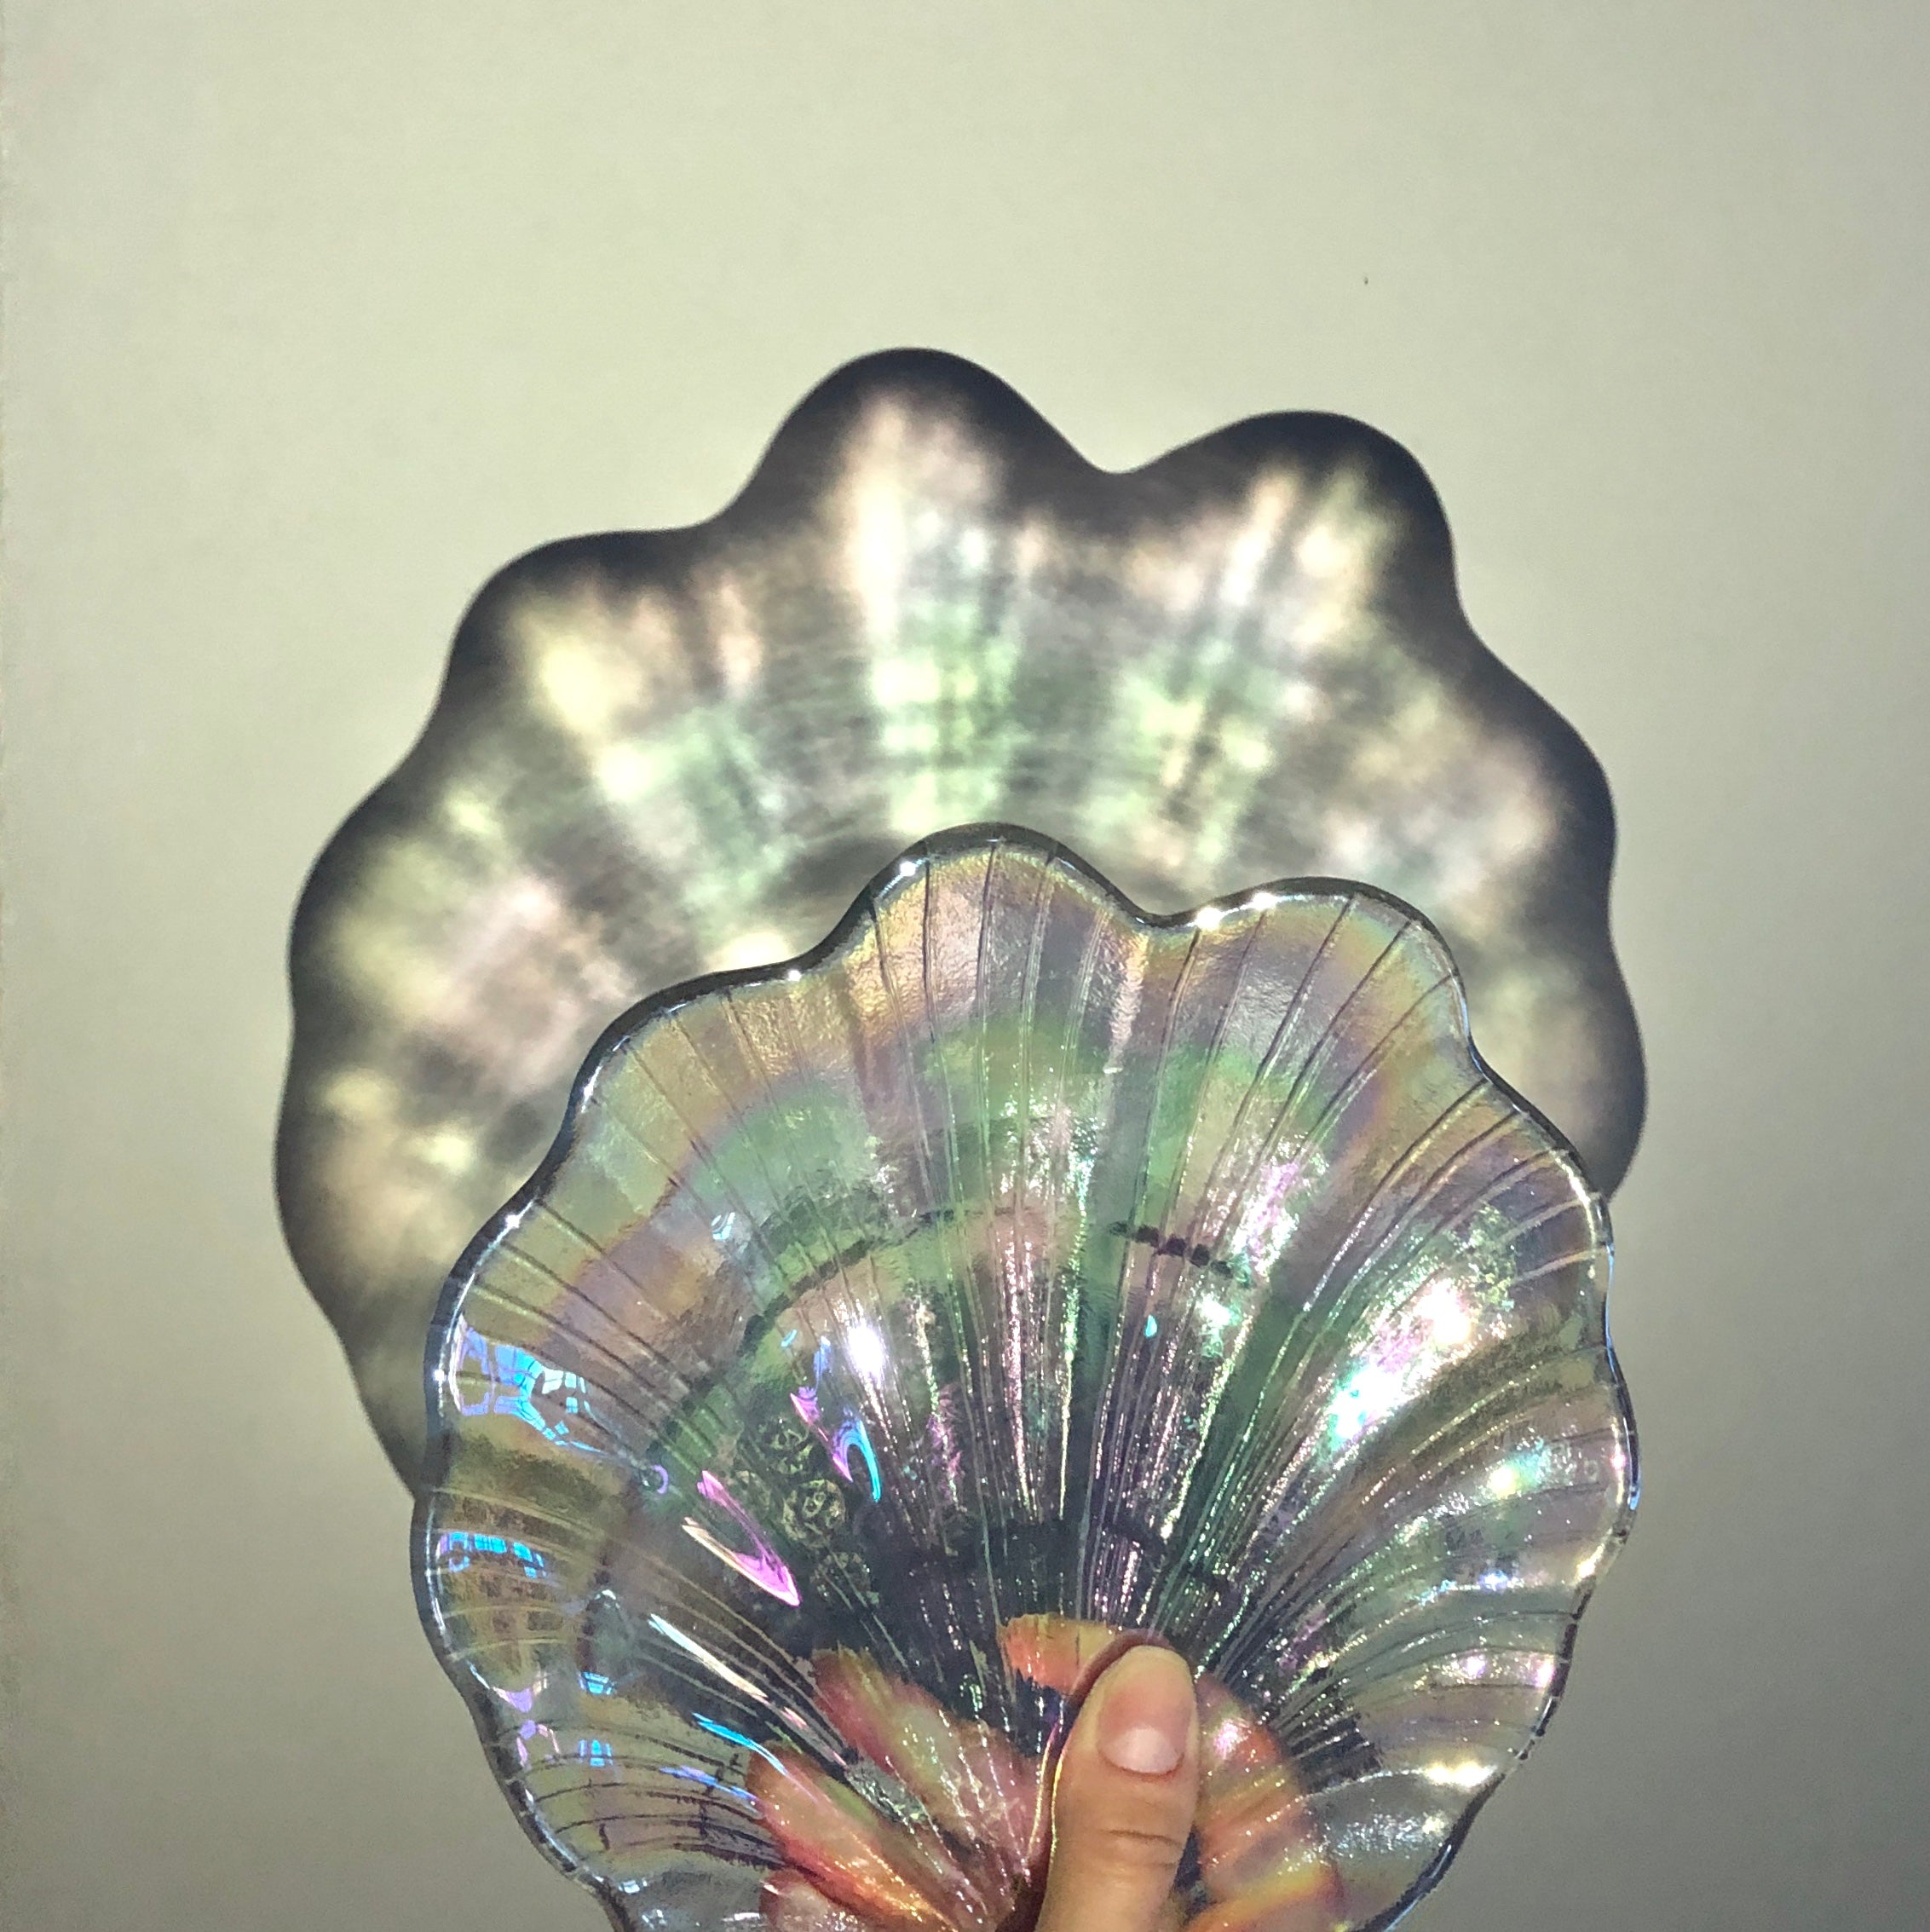 Holographic Shell Plate by PROSE Tabletop